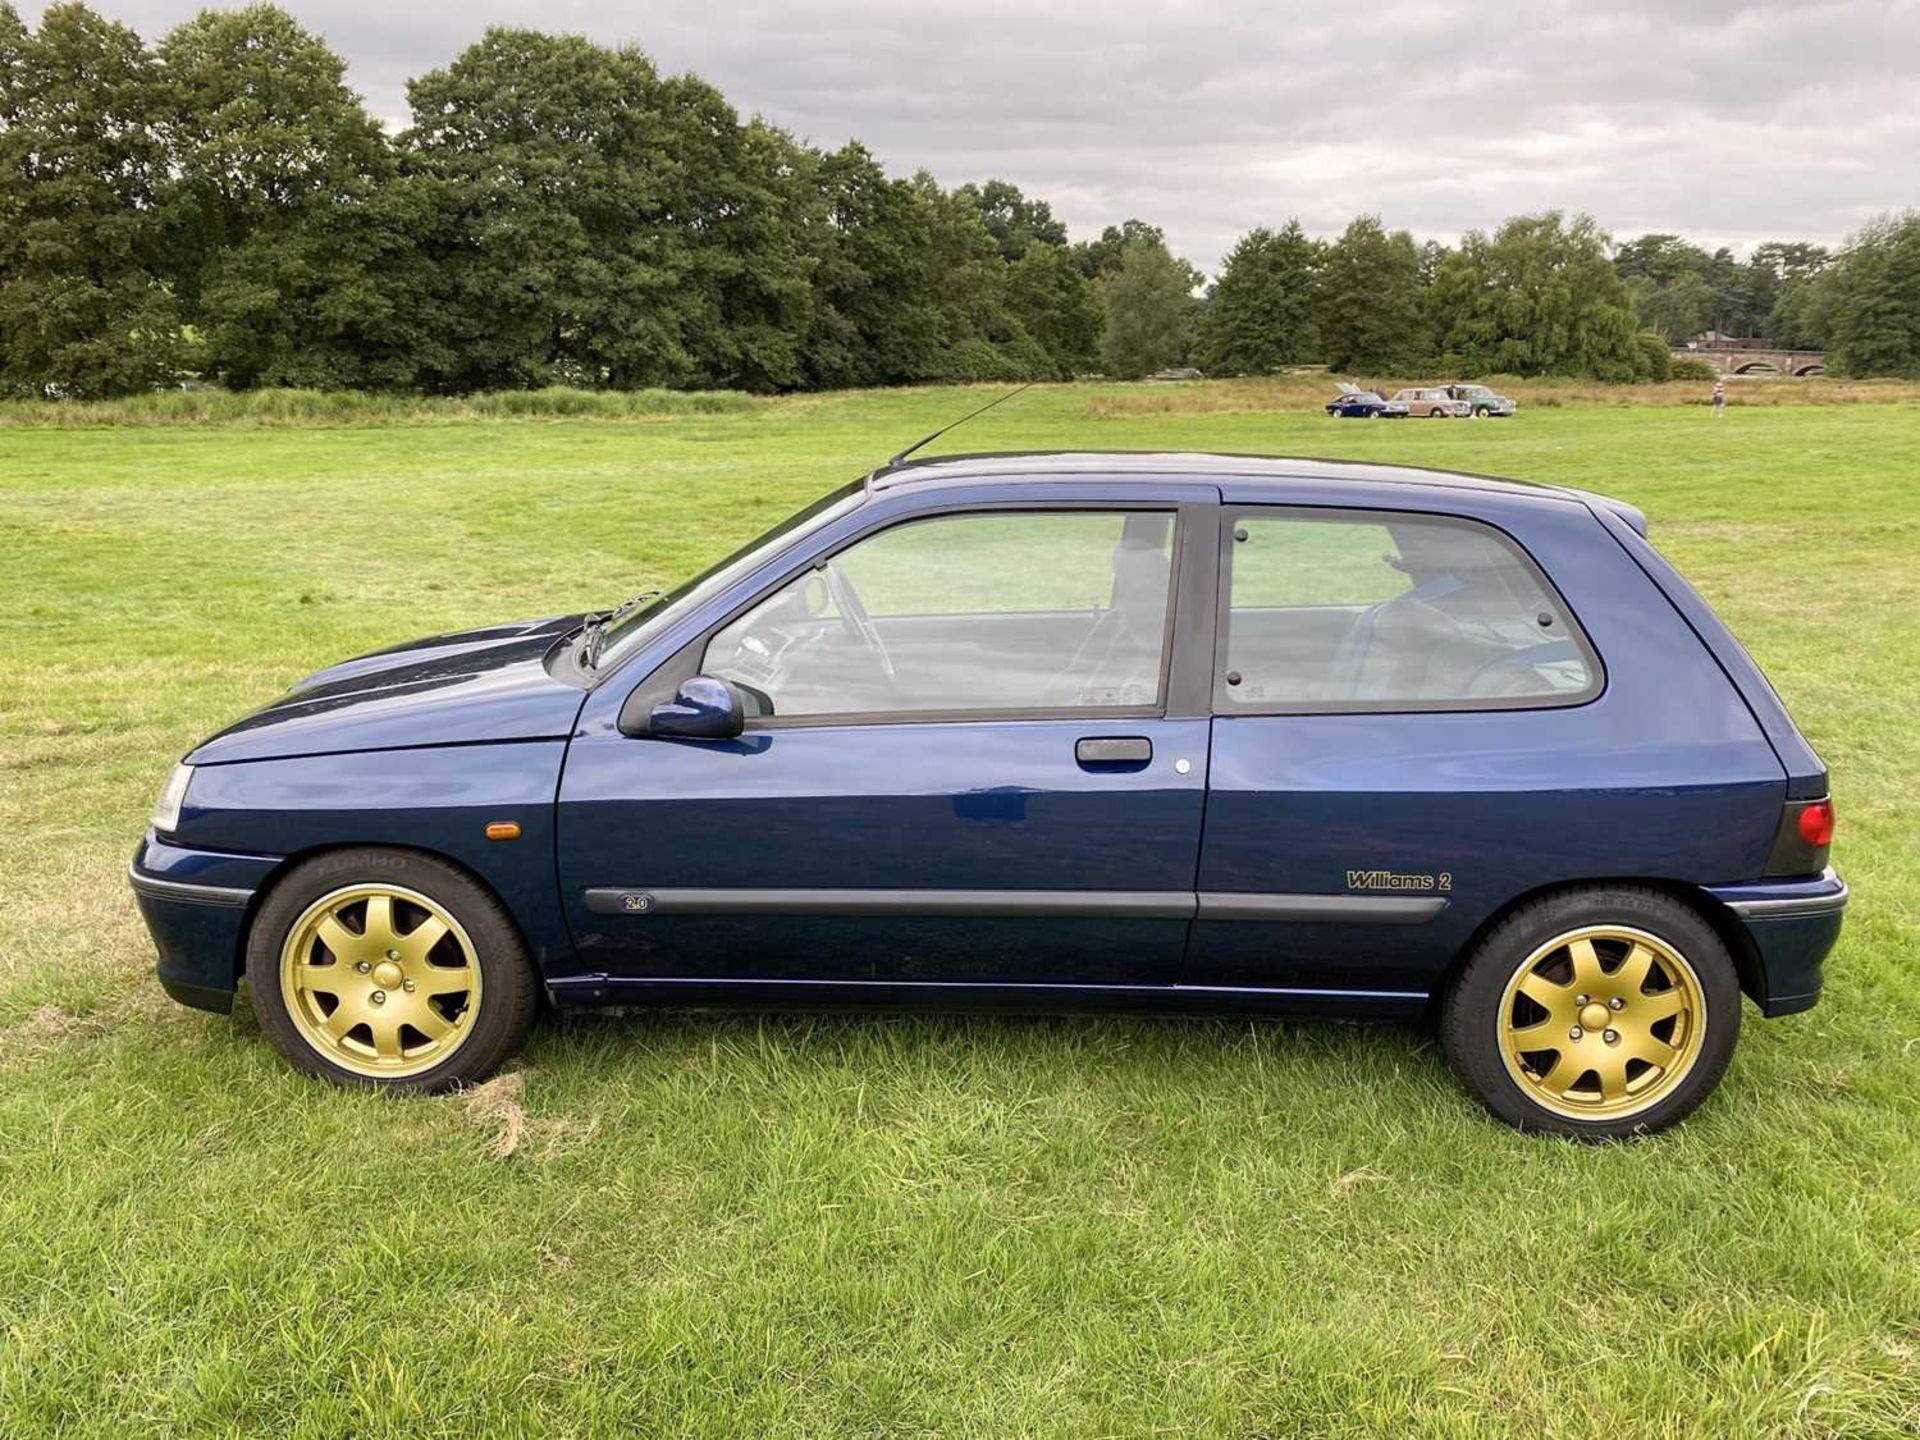 1995 Renault Clio Williams 2 UK-delivered, second series model and said to be one of just 482 produc - Image 8 of 66